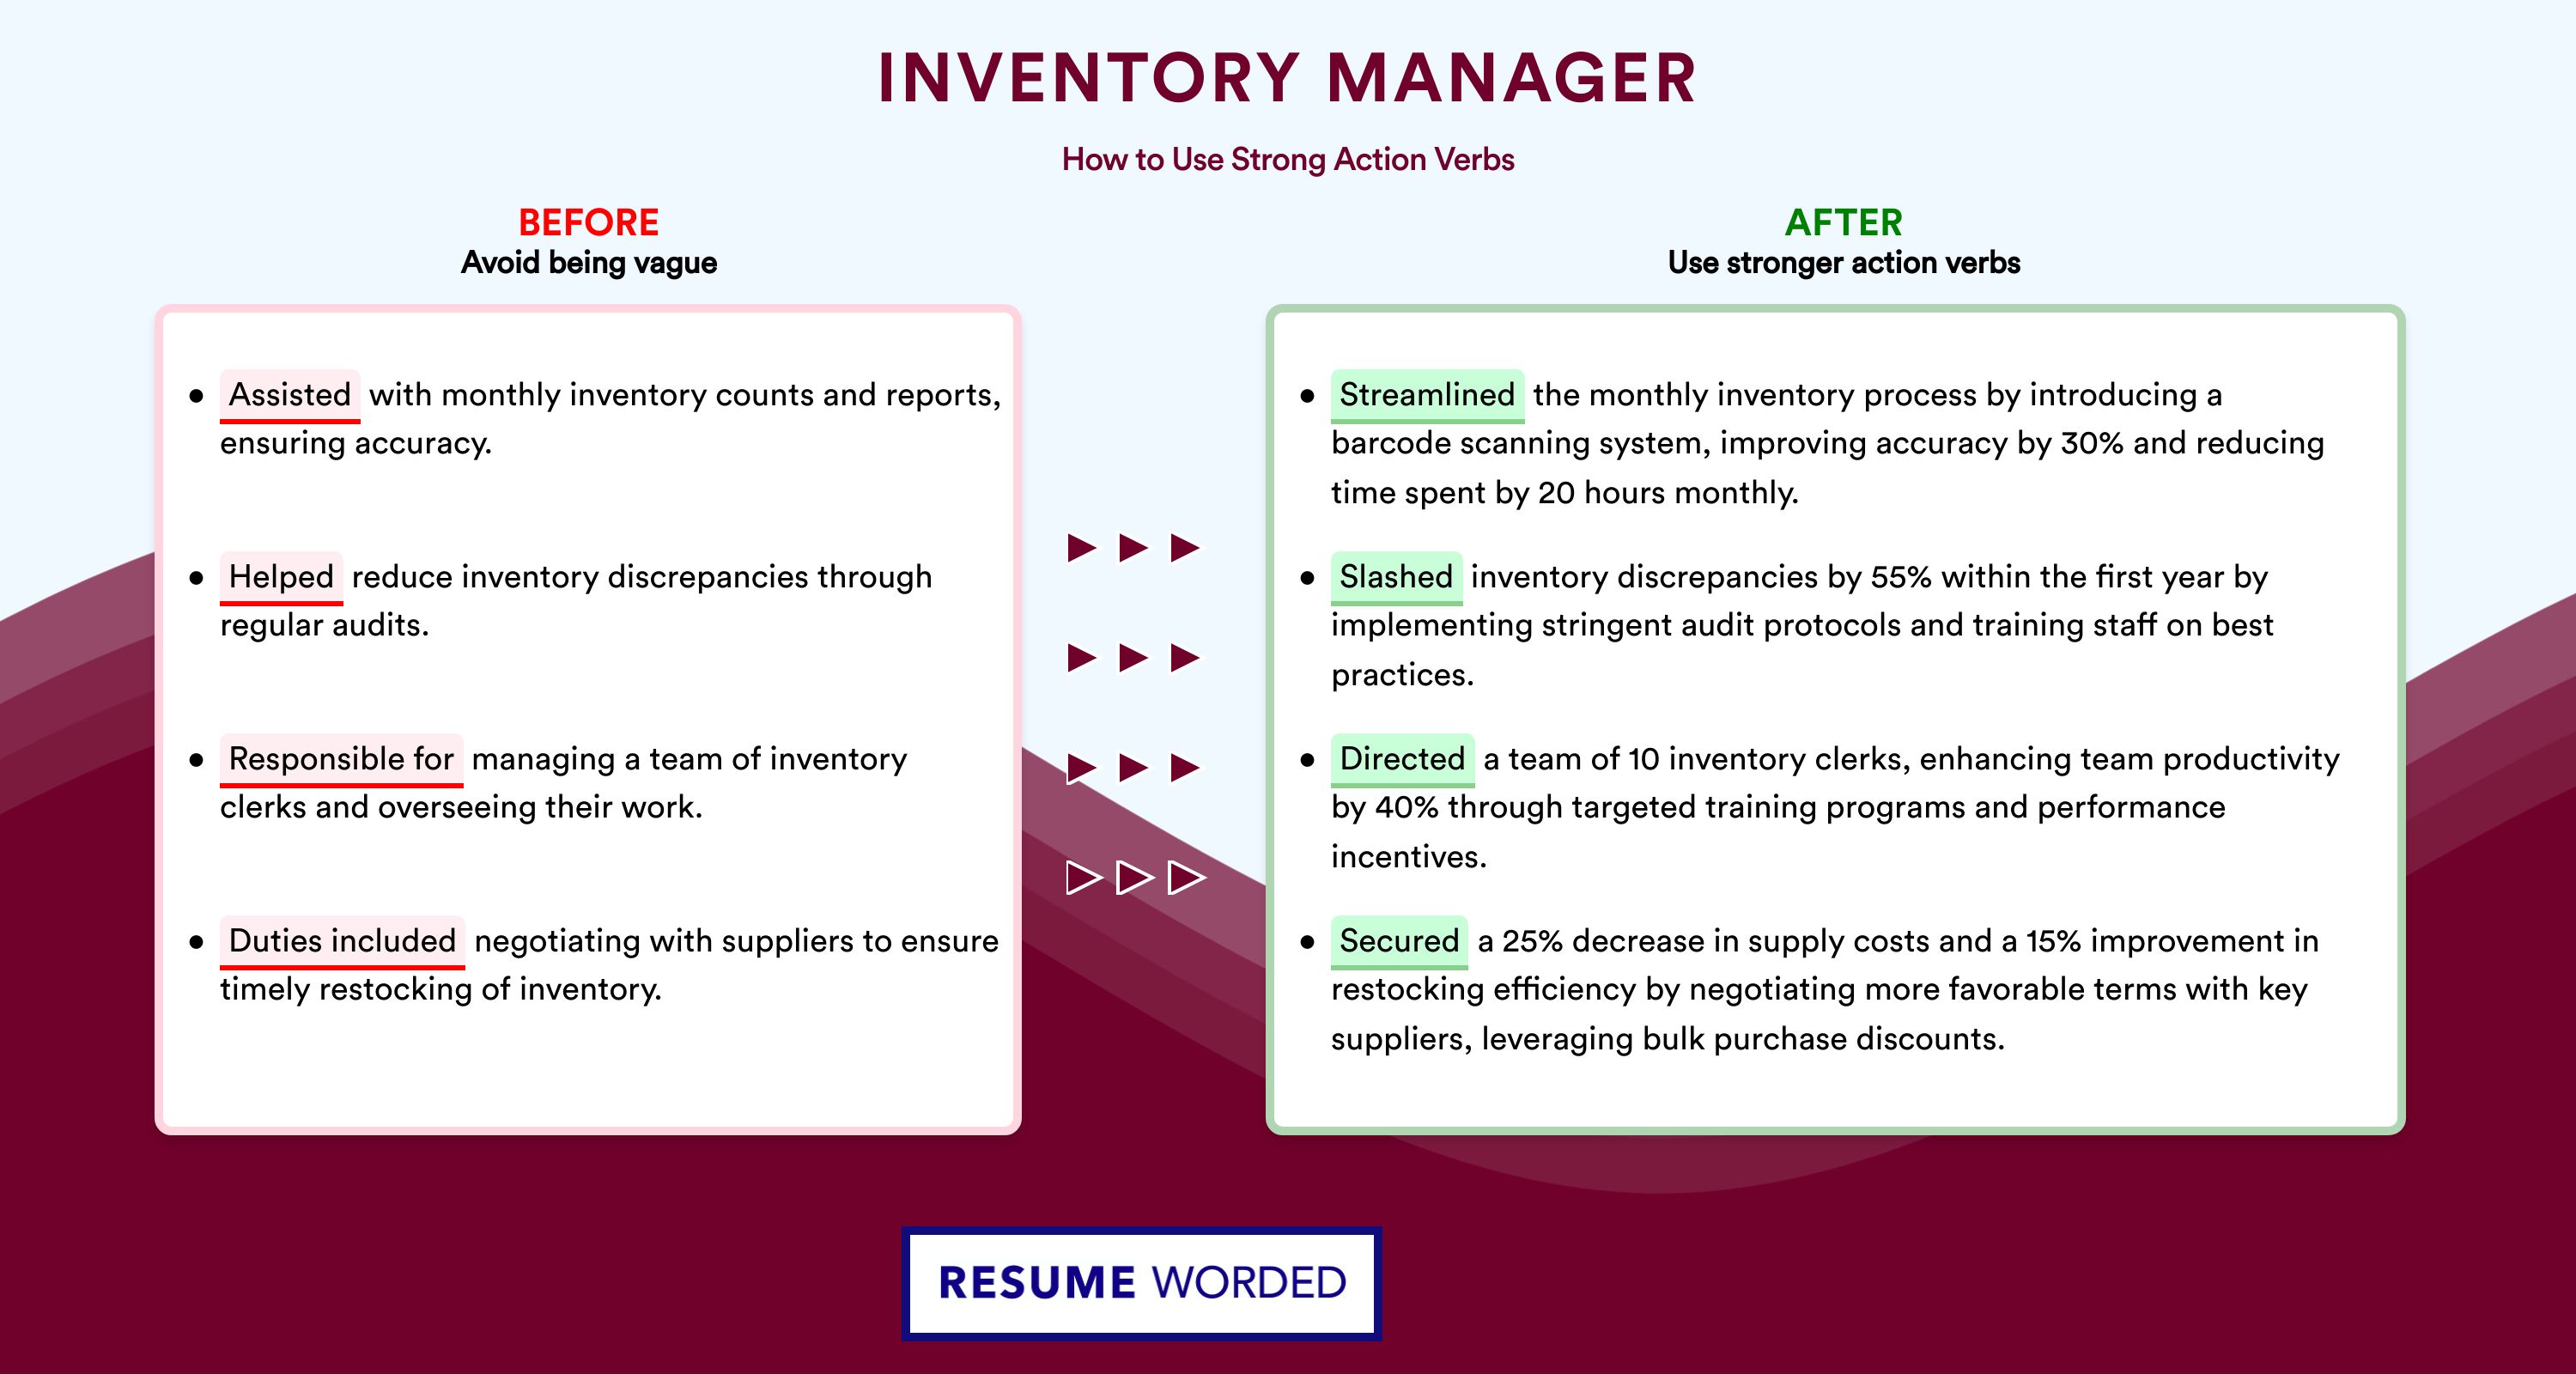 Action Verbs for Inventory Manager